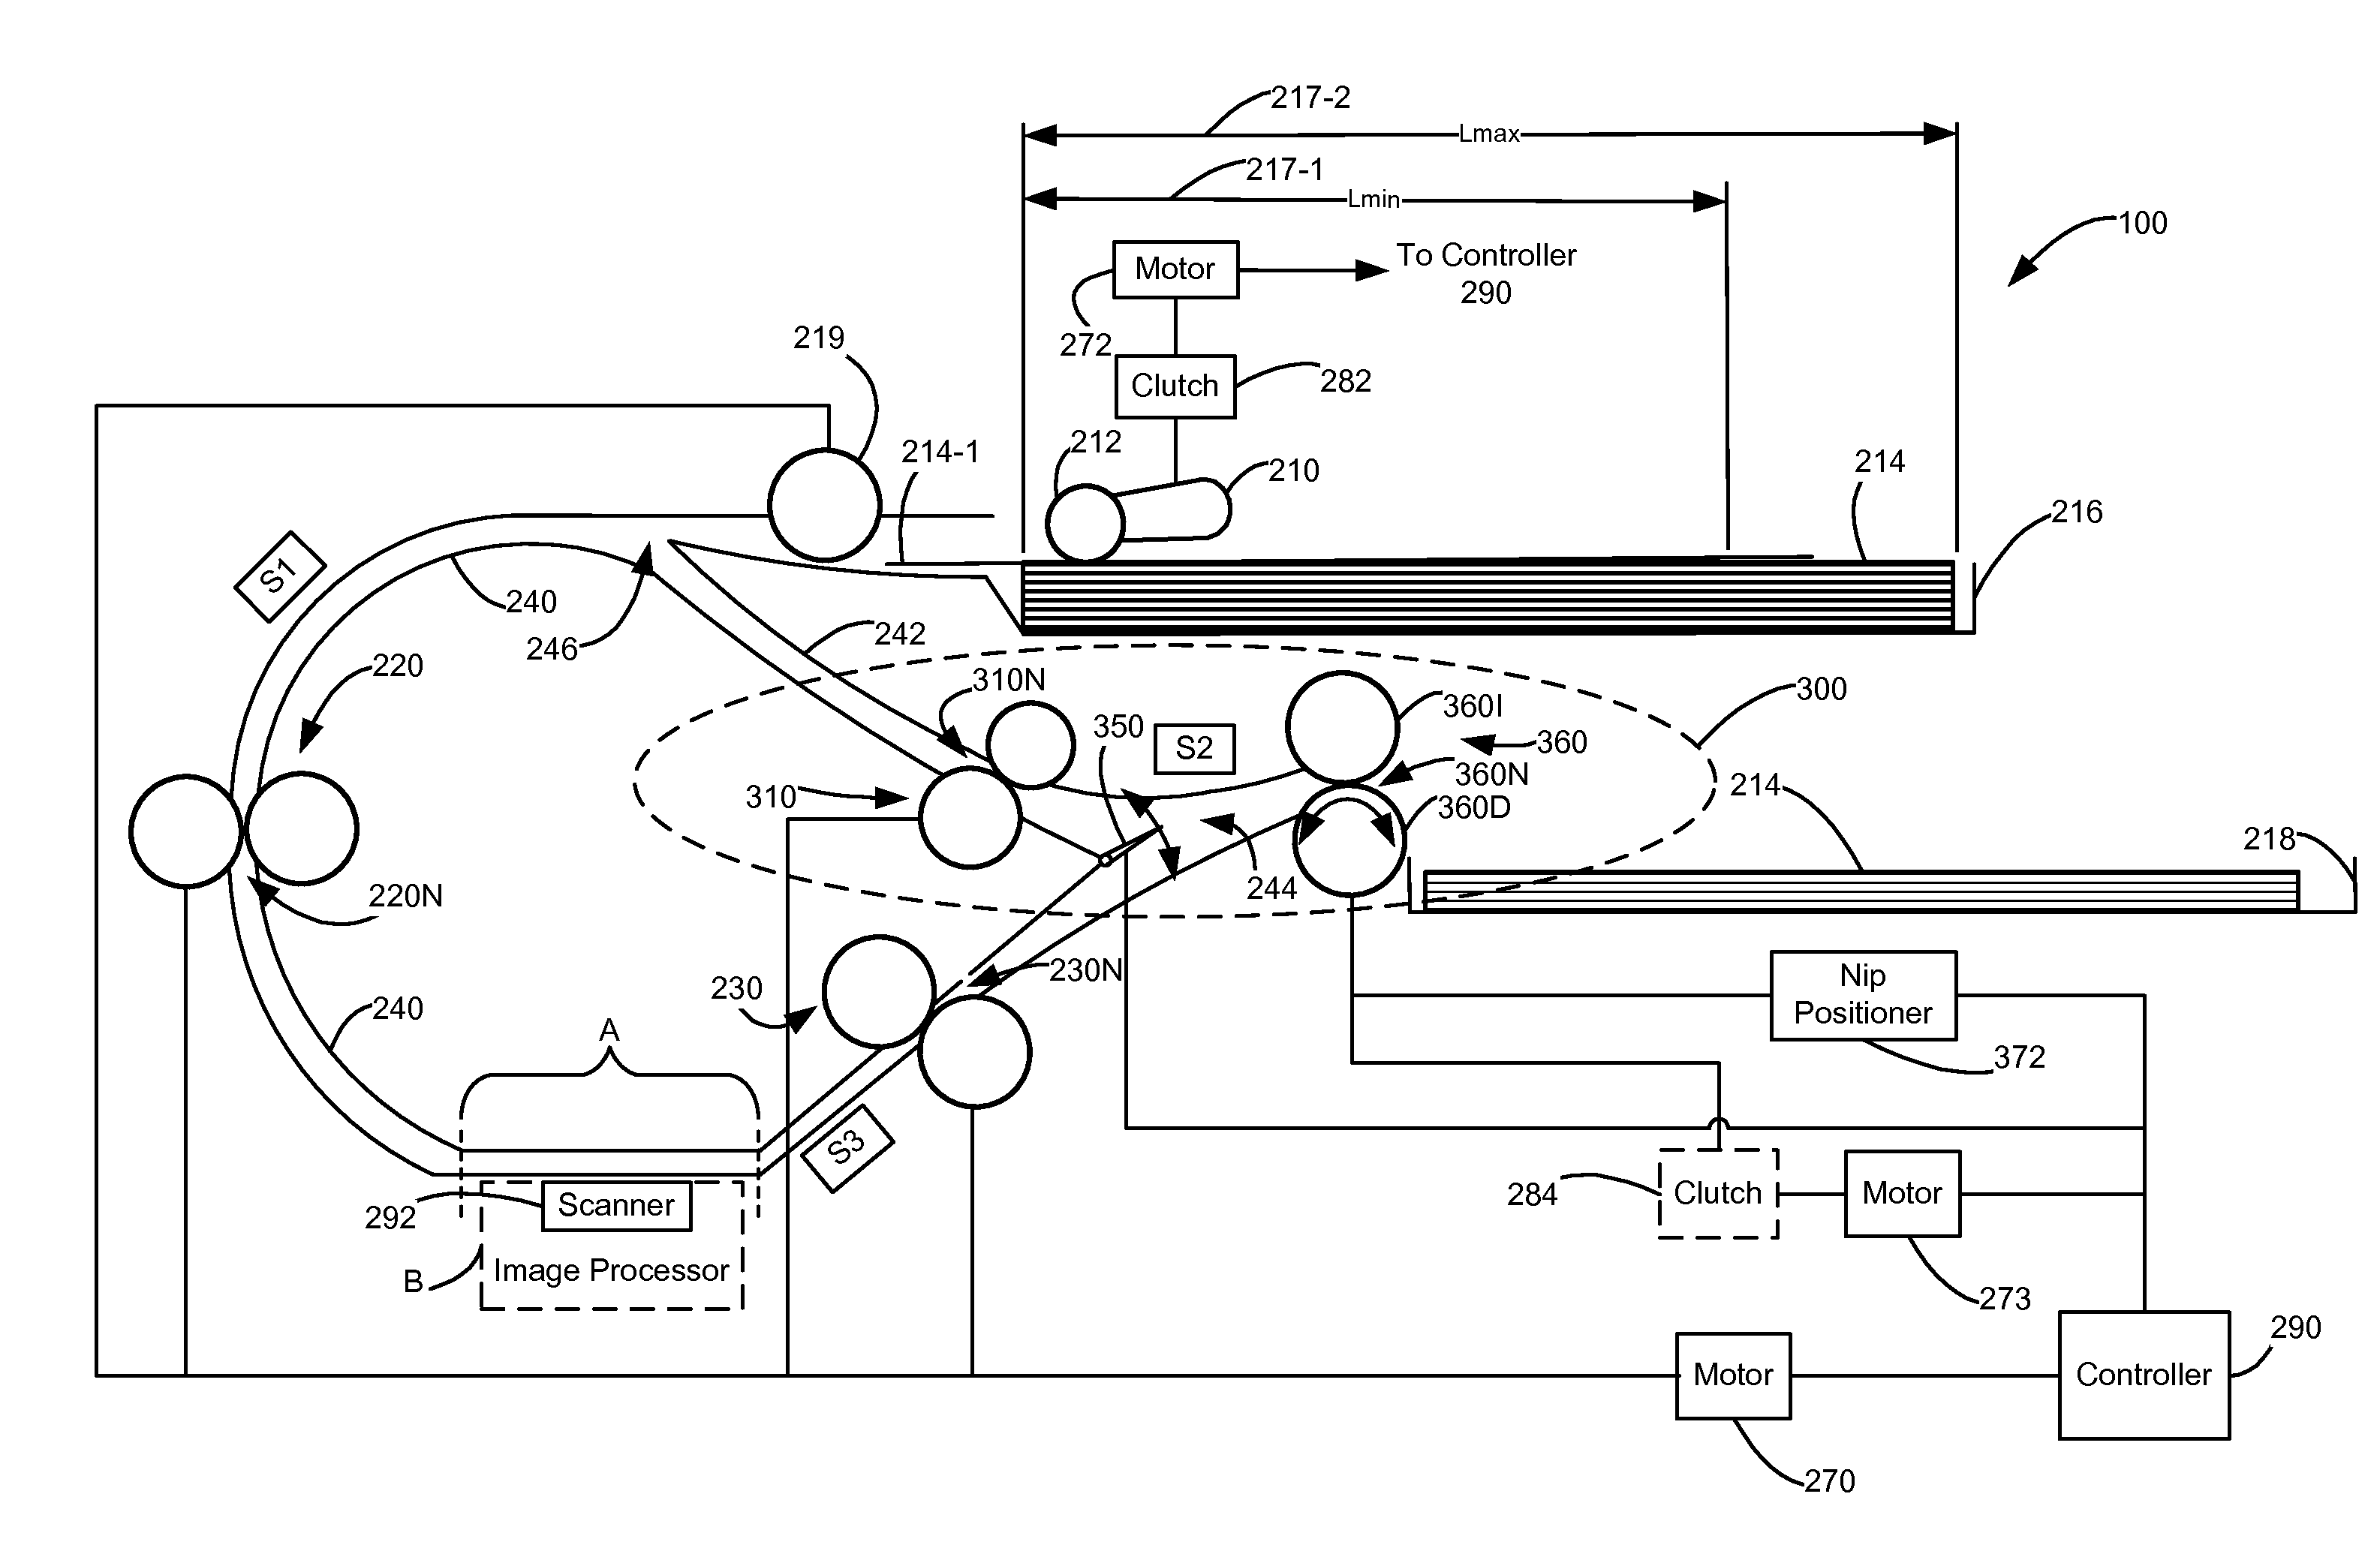 Media retractor and recycler system for automatic document feeders and duplexers and method for using same